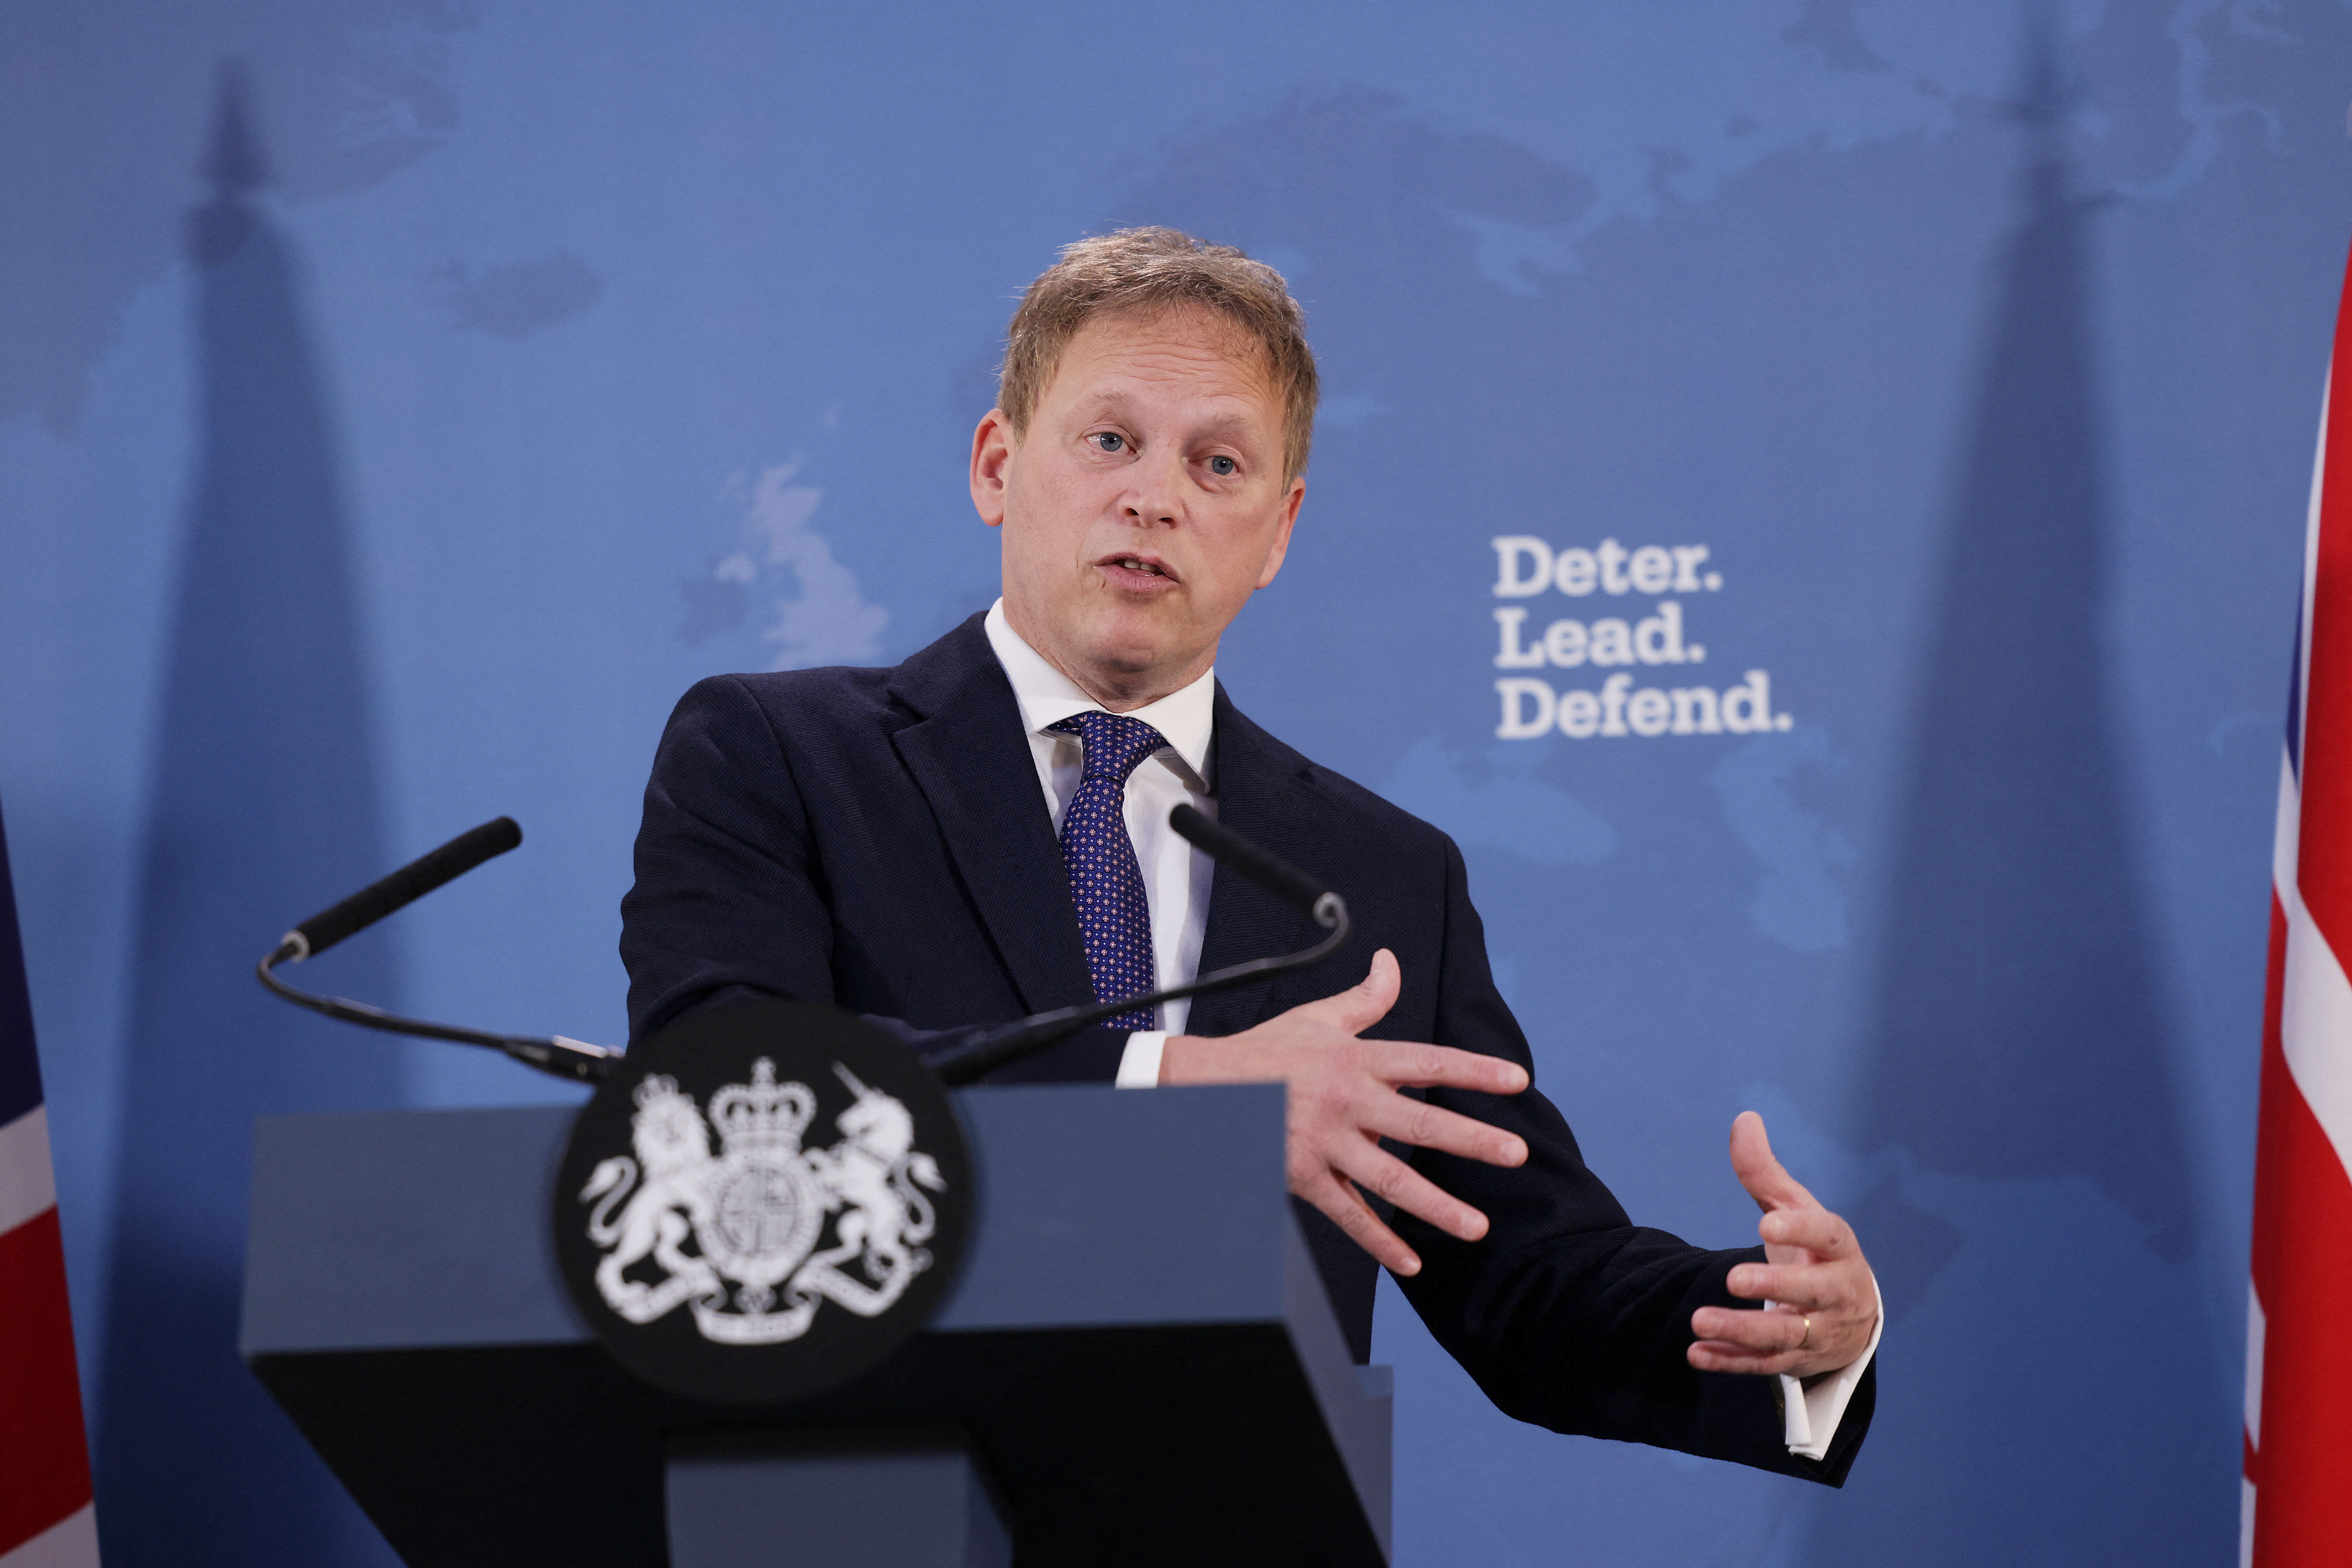 Britain's Defence Secretary Grant Shapps gives a speech at Lancaster House in London